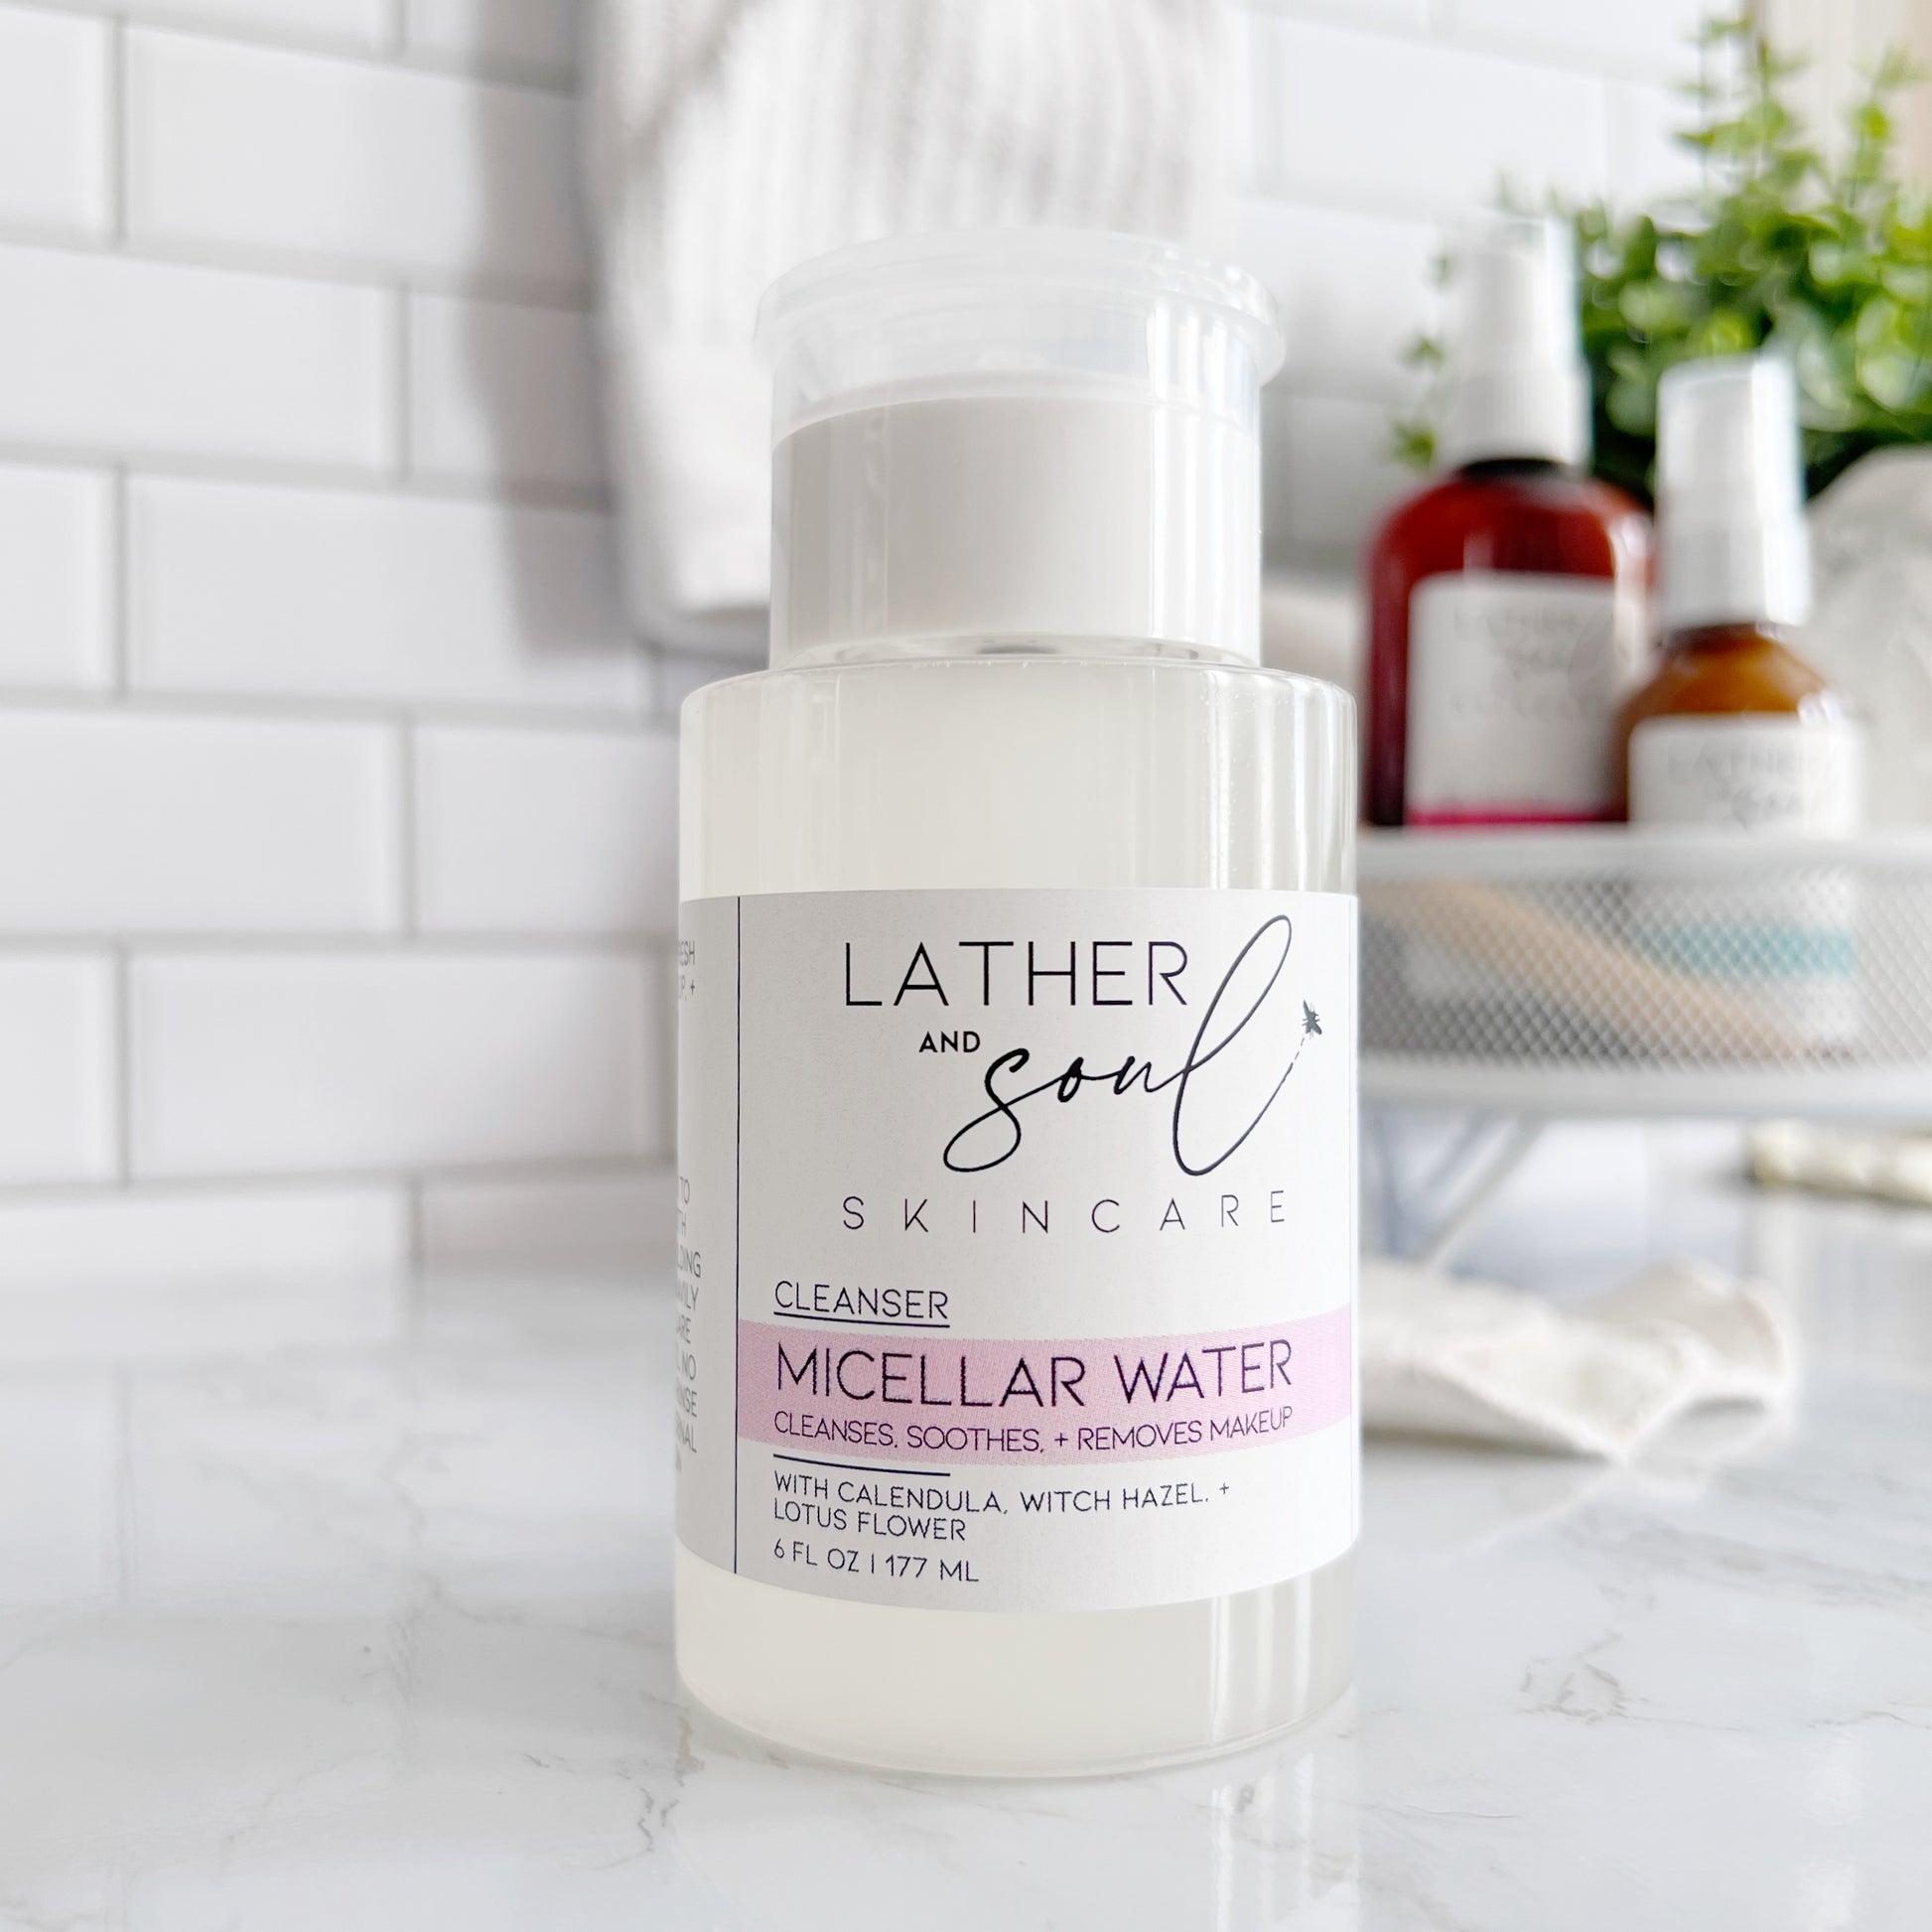 The best gentle micellar water for quick cleansing or removing makeup by Lather + Soul